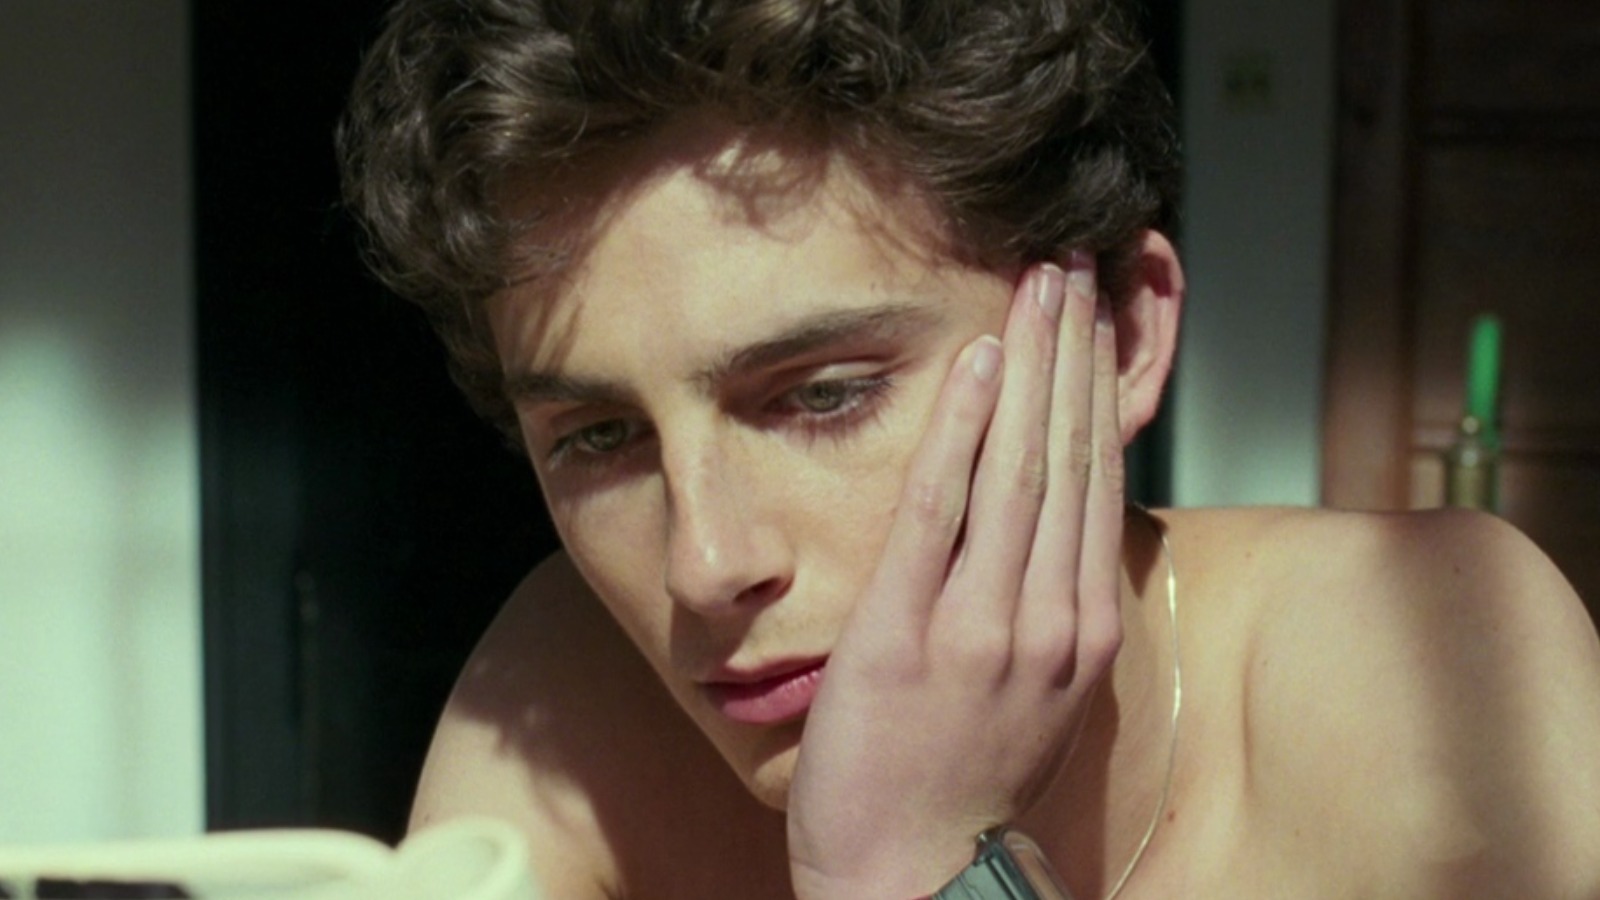 Movie review: 'Call Me By Your Name' a lovely, textured coming-of